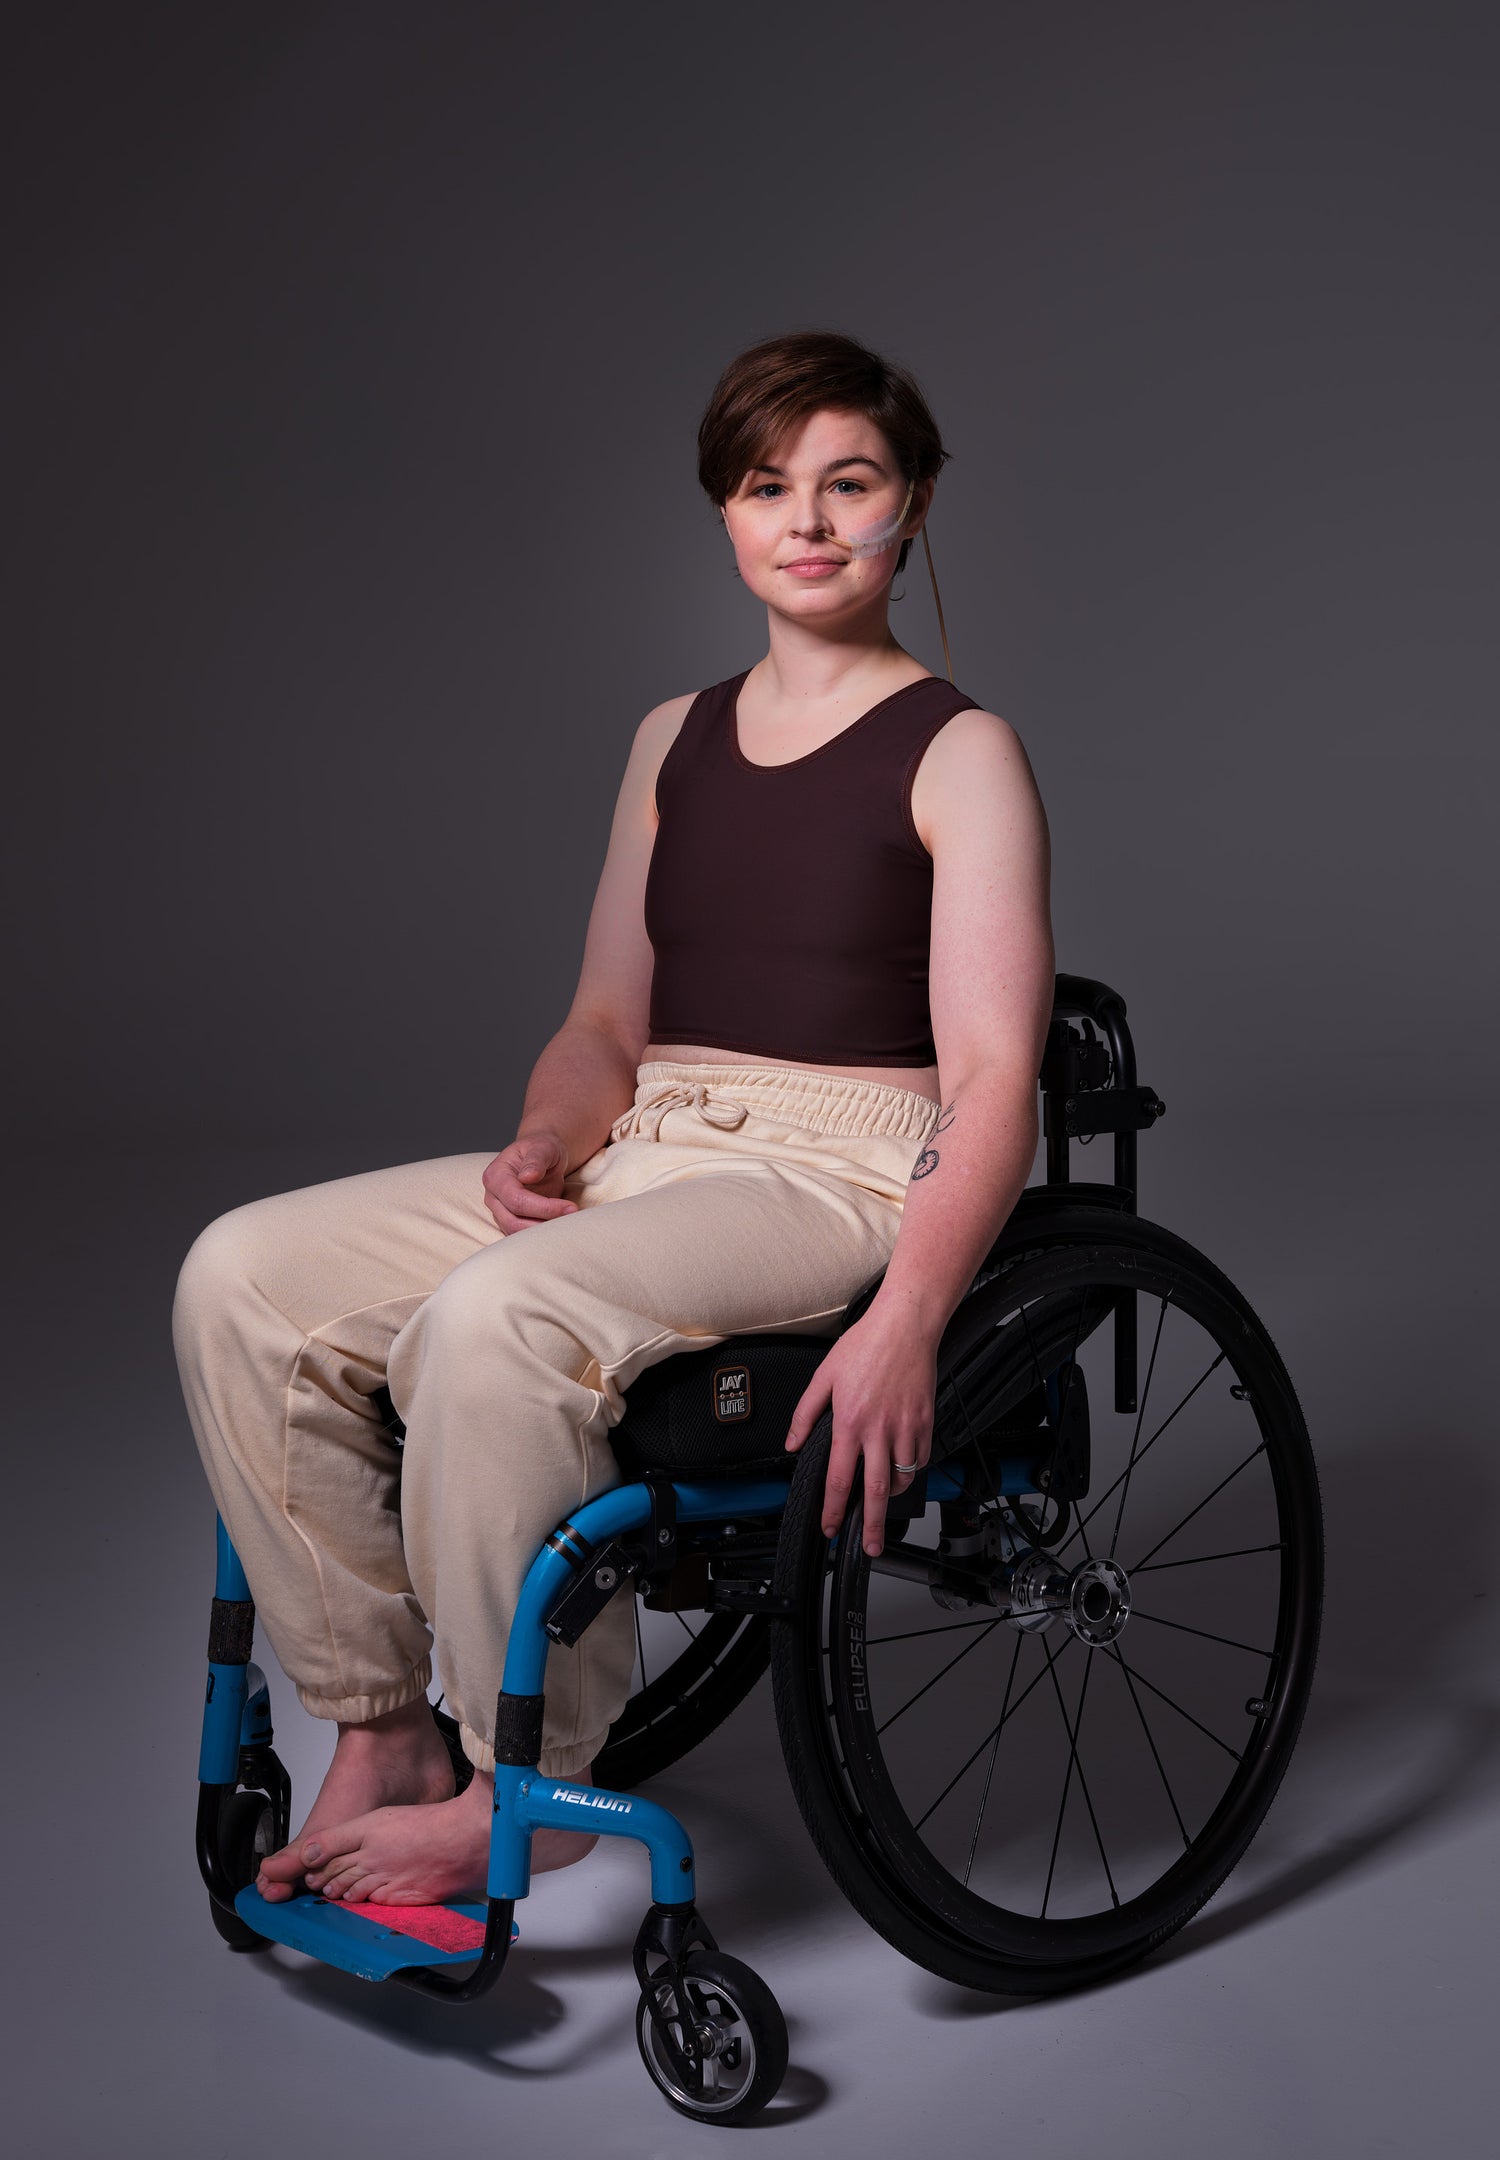 Short Binder extra strong brown modeled by Brecht who is in a wheelchair, side view